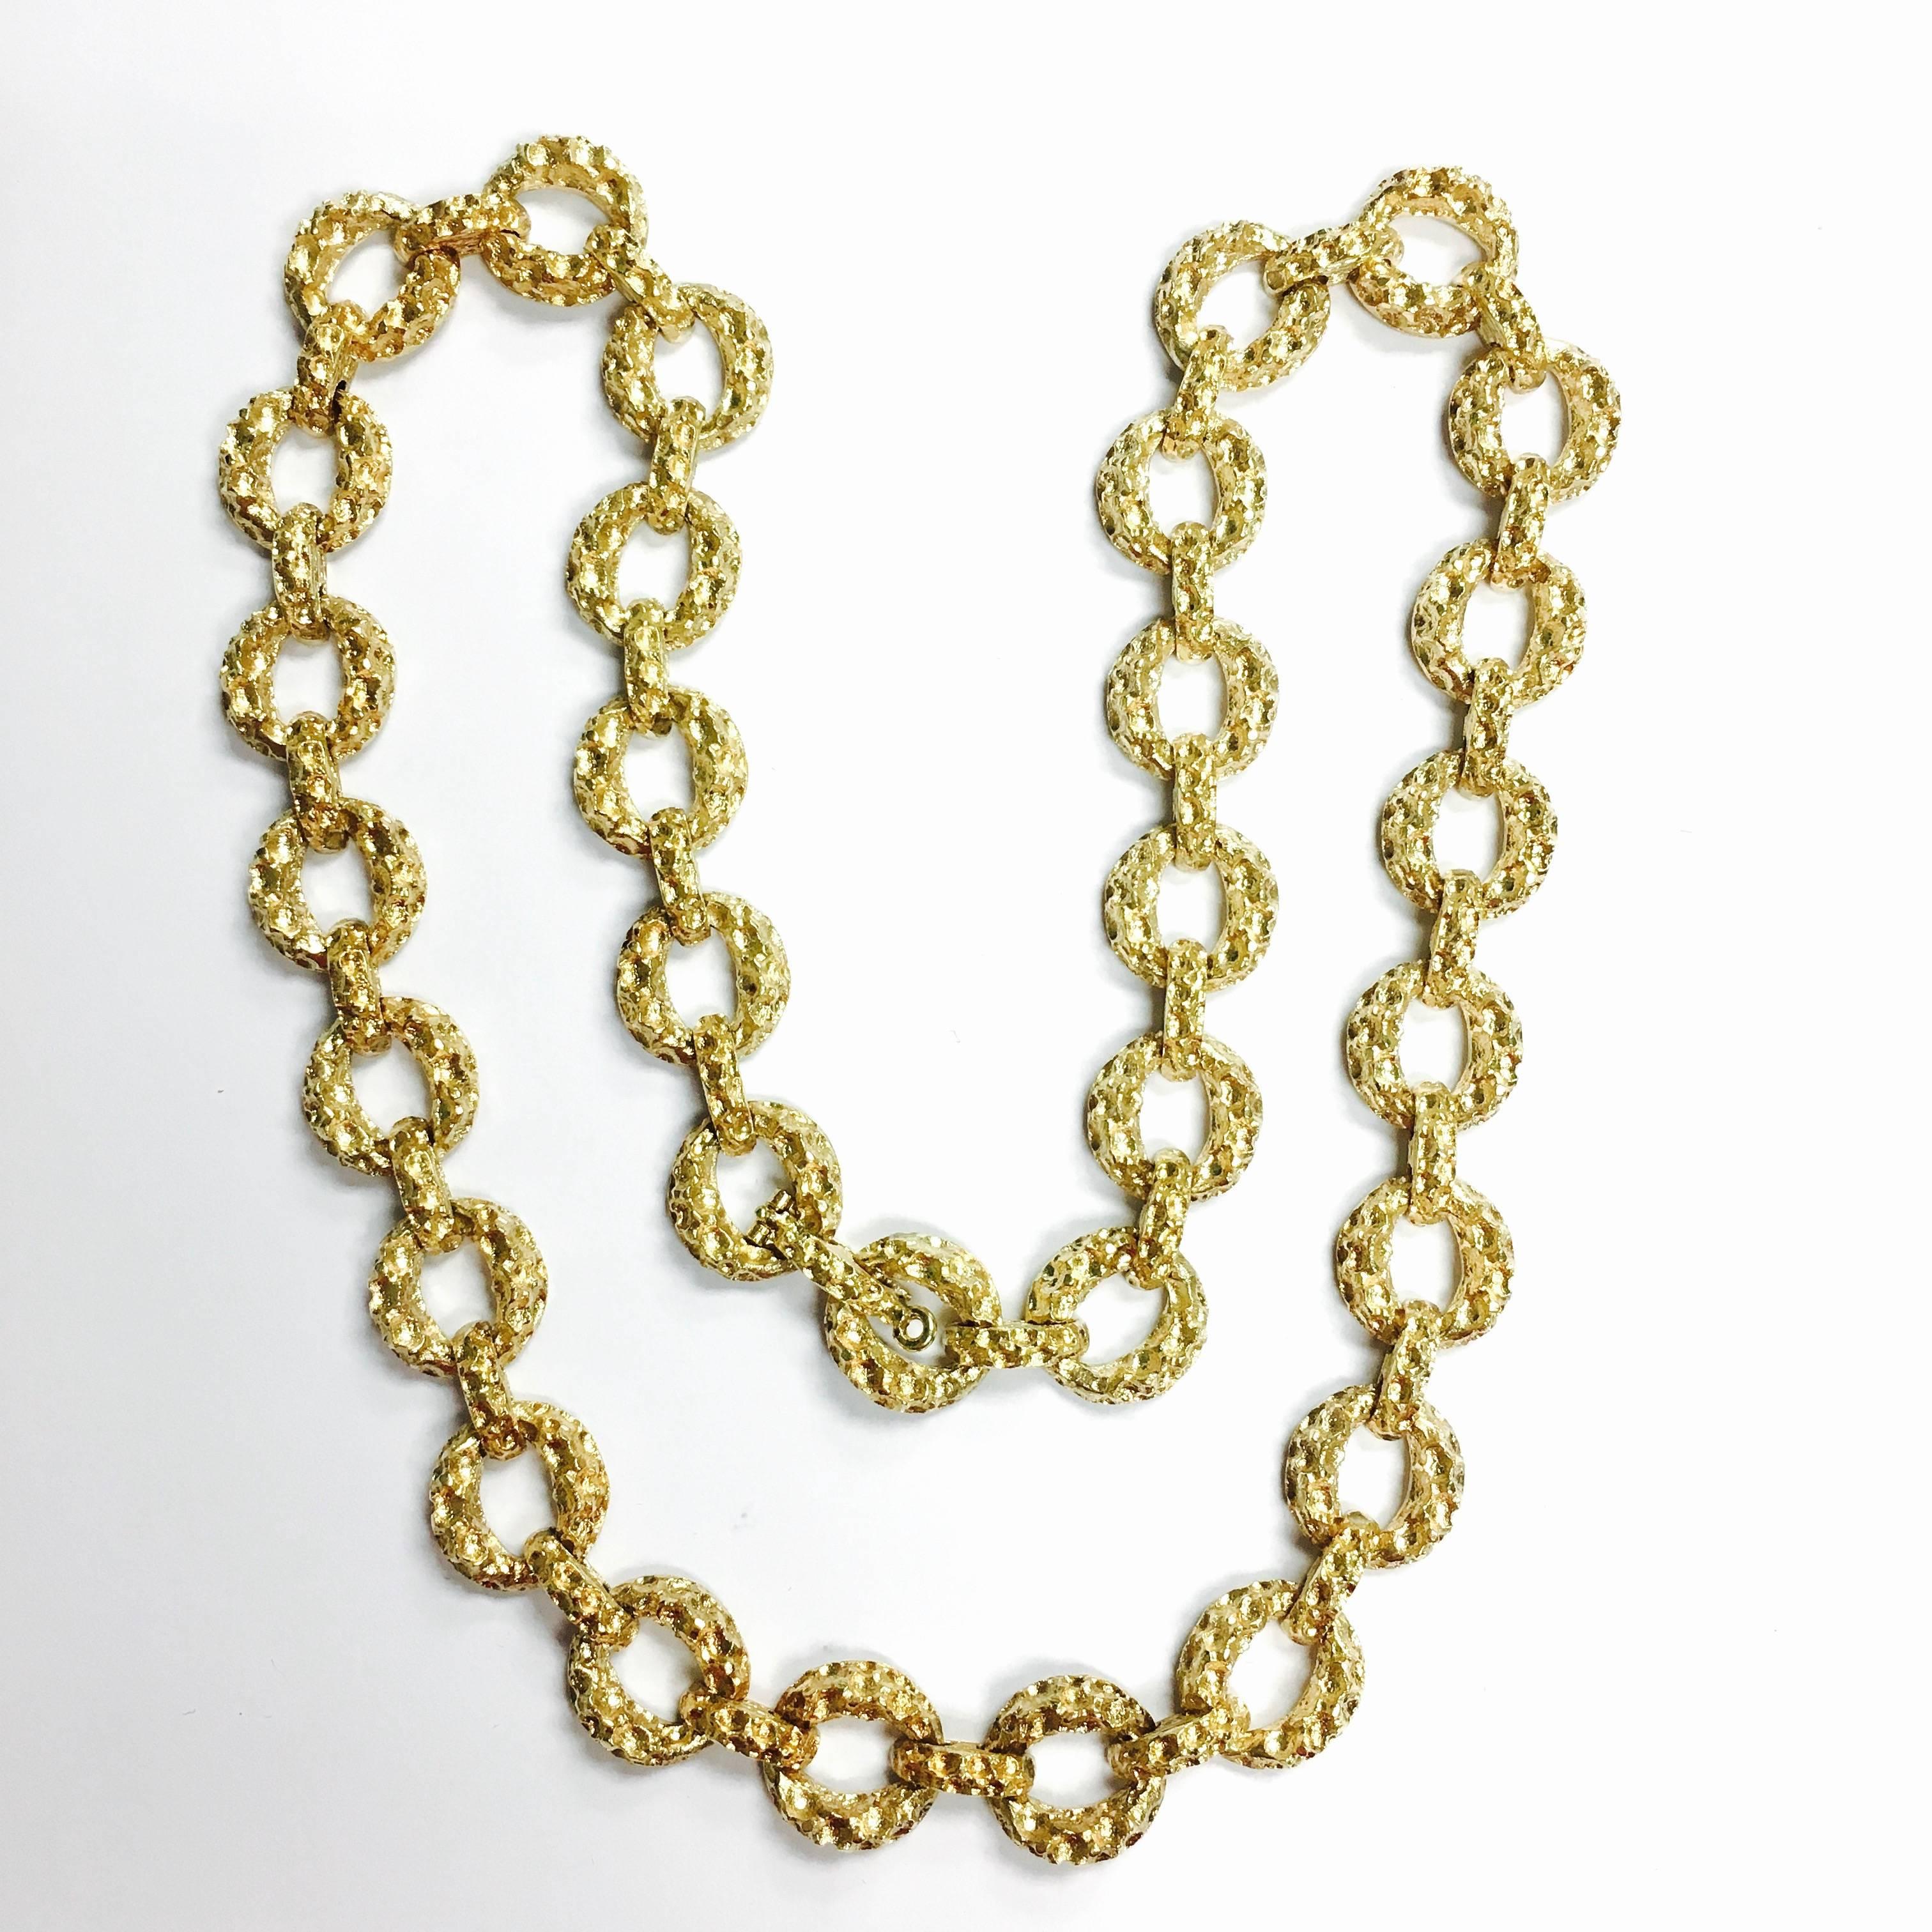 Crafted in 14K yellow gold with a textured finish, the necklace features a diamond set large pendant enhancer, supported by a heavy round textured links chain. 29 round brilliant cut diamonds,approximate total weight: 1.7ct., Color: F-G, Clarity: